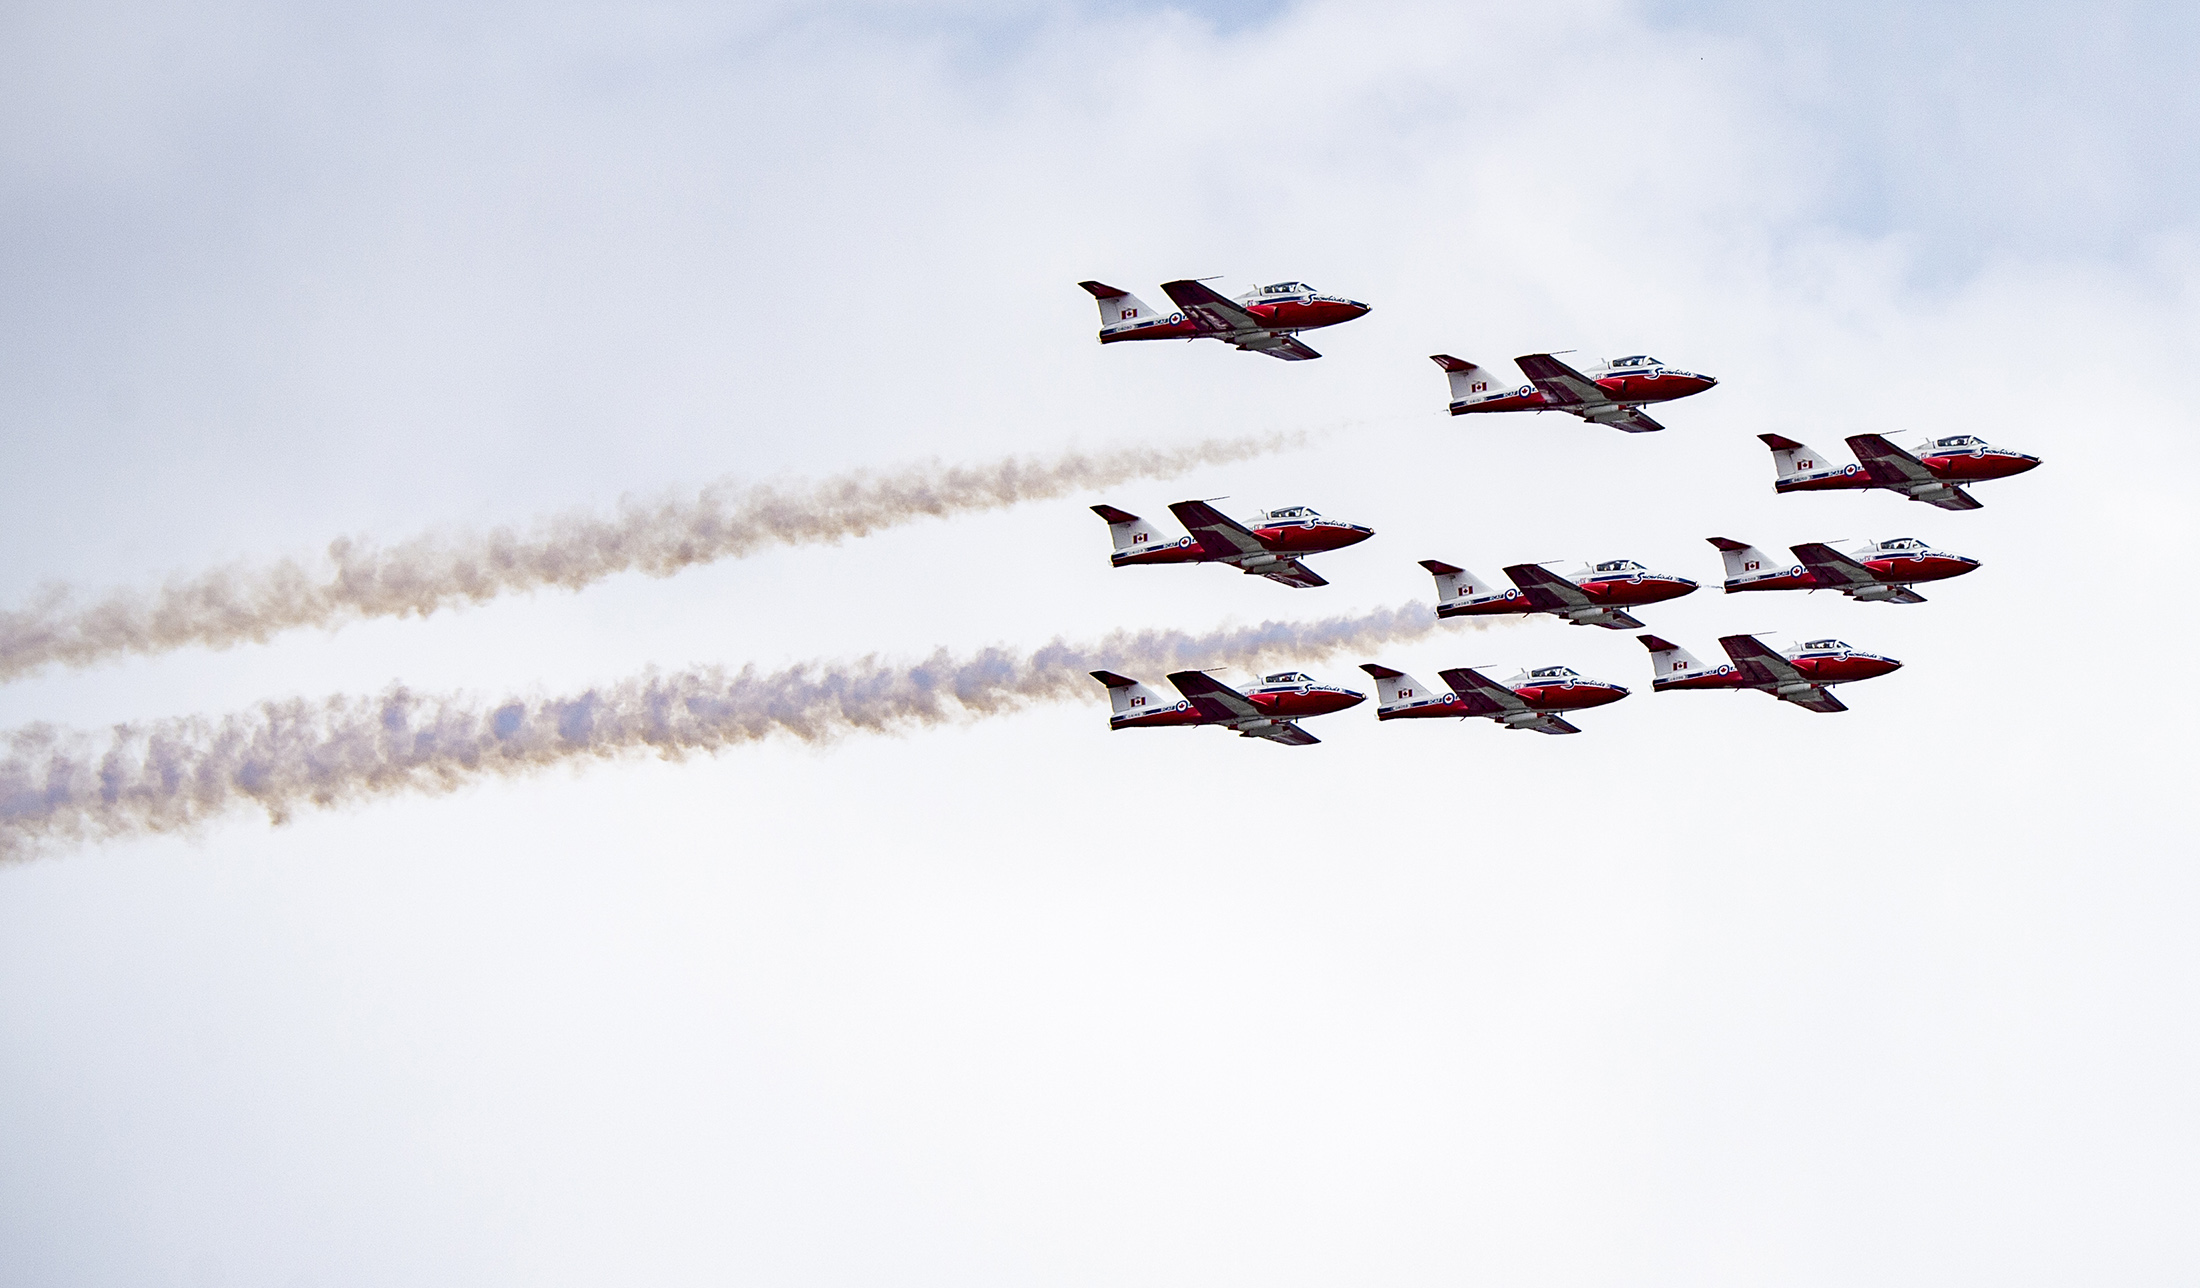 The Snowbirds, the Royal Canadian Air Force air acrobatics team, fly over Montreal, Quebec, Canada, on May 7, 2020.